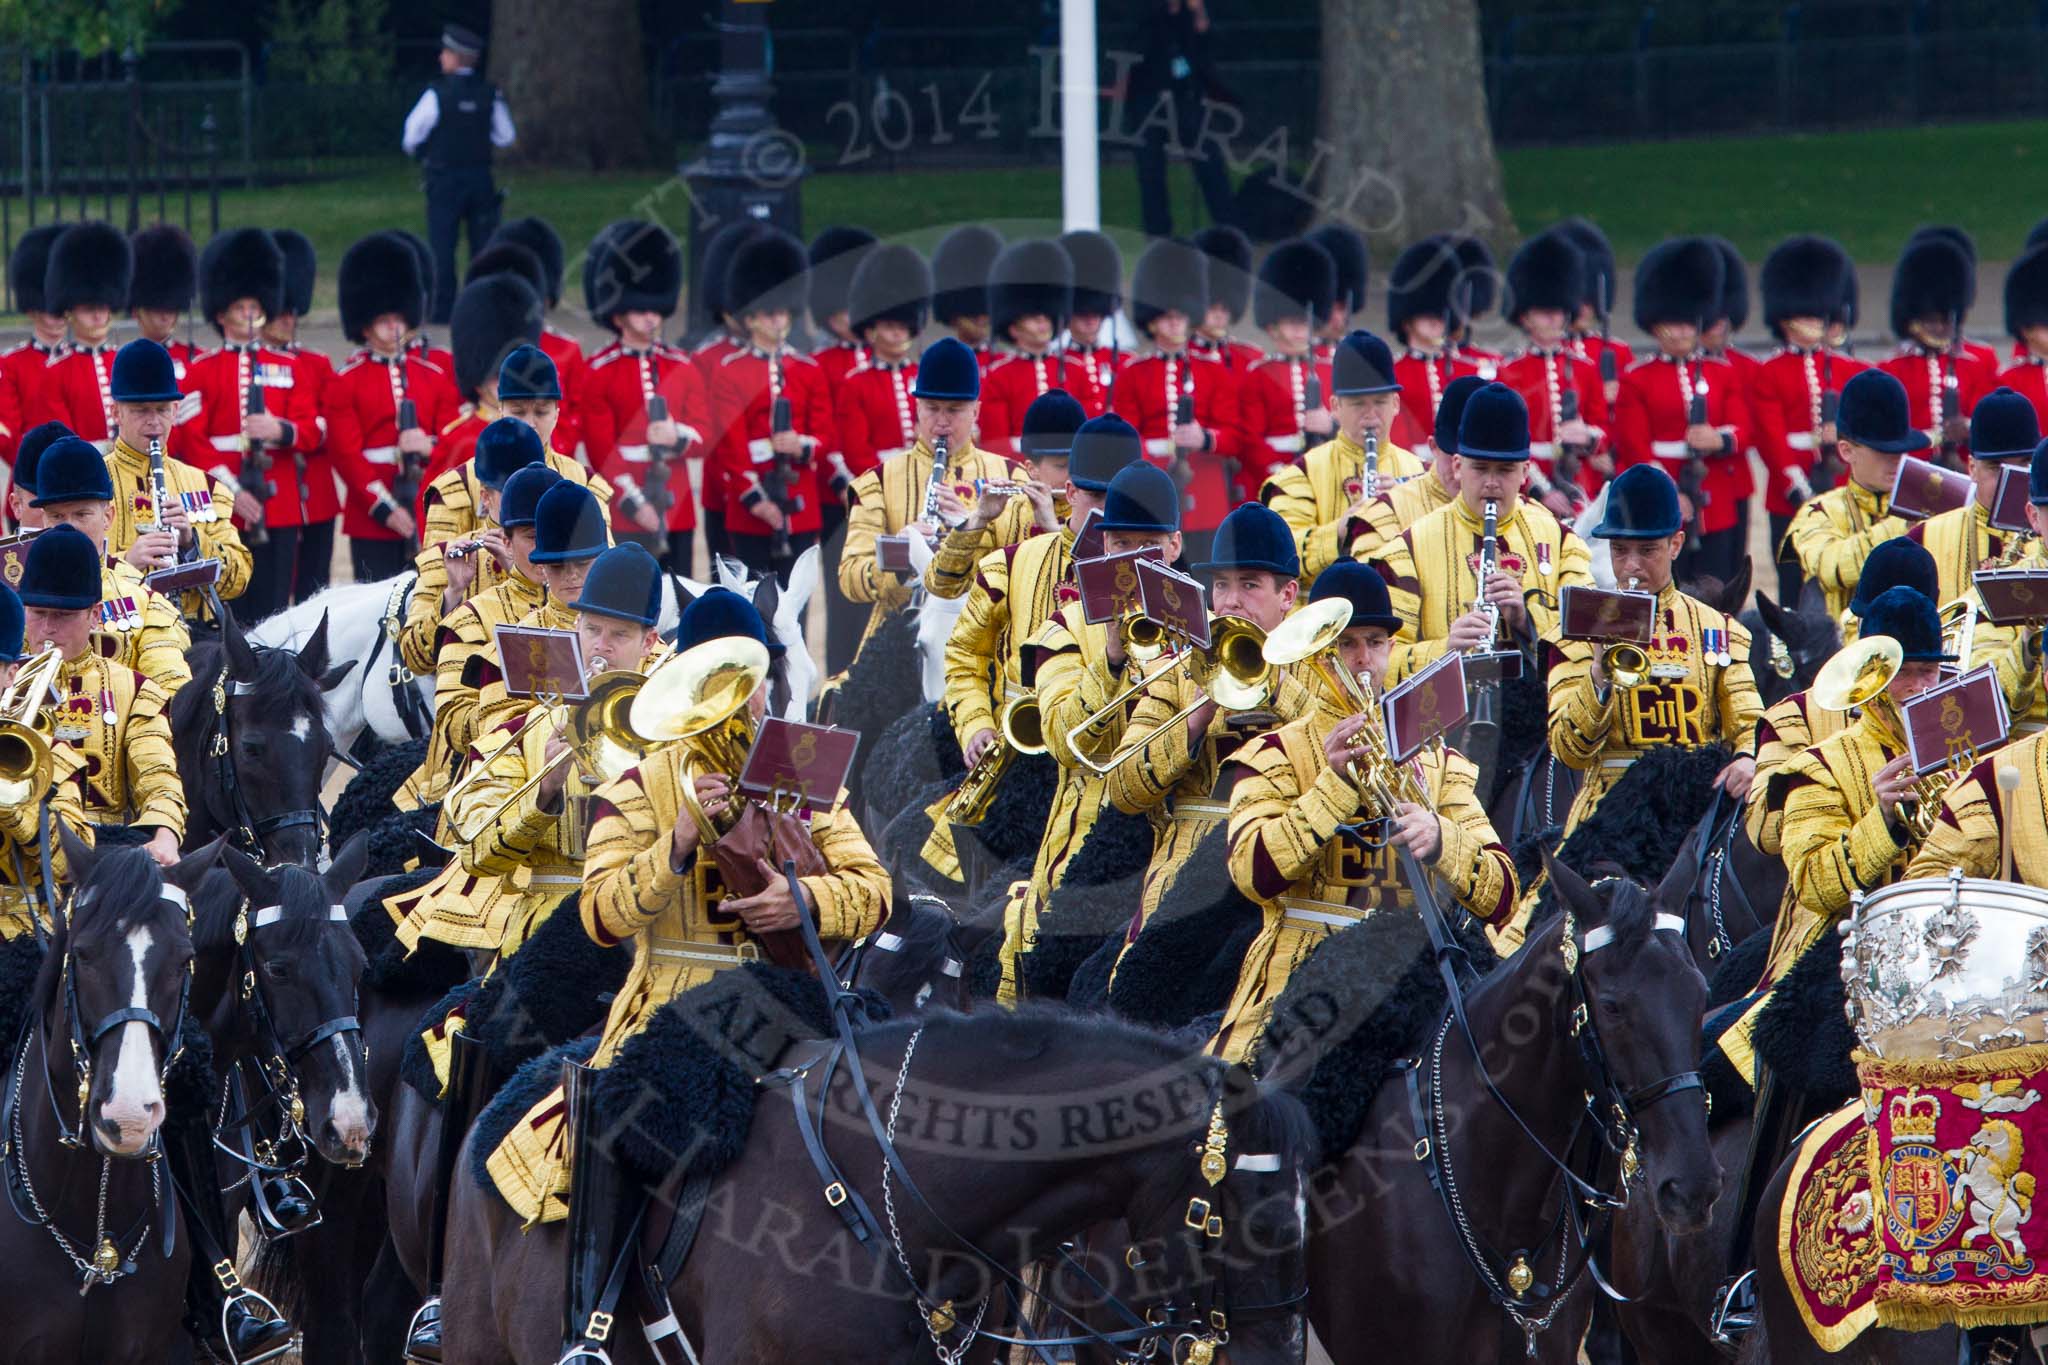 Trooping the Colour 2014.
Horse Guards Parade, Westminster,
London SW1A,

United Kingdom,
on 14 June 2014 at 11:56, image #767